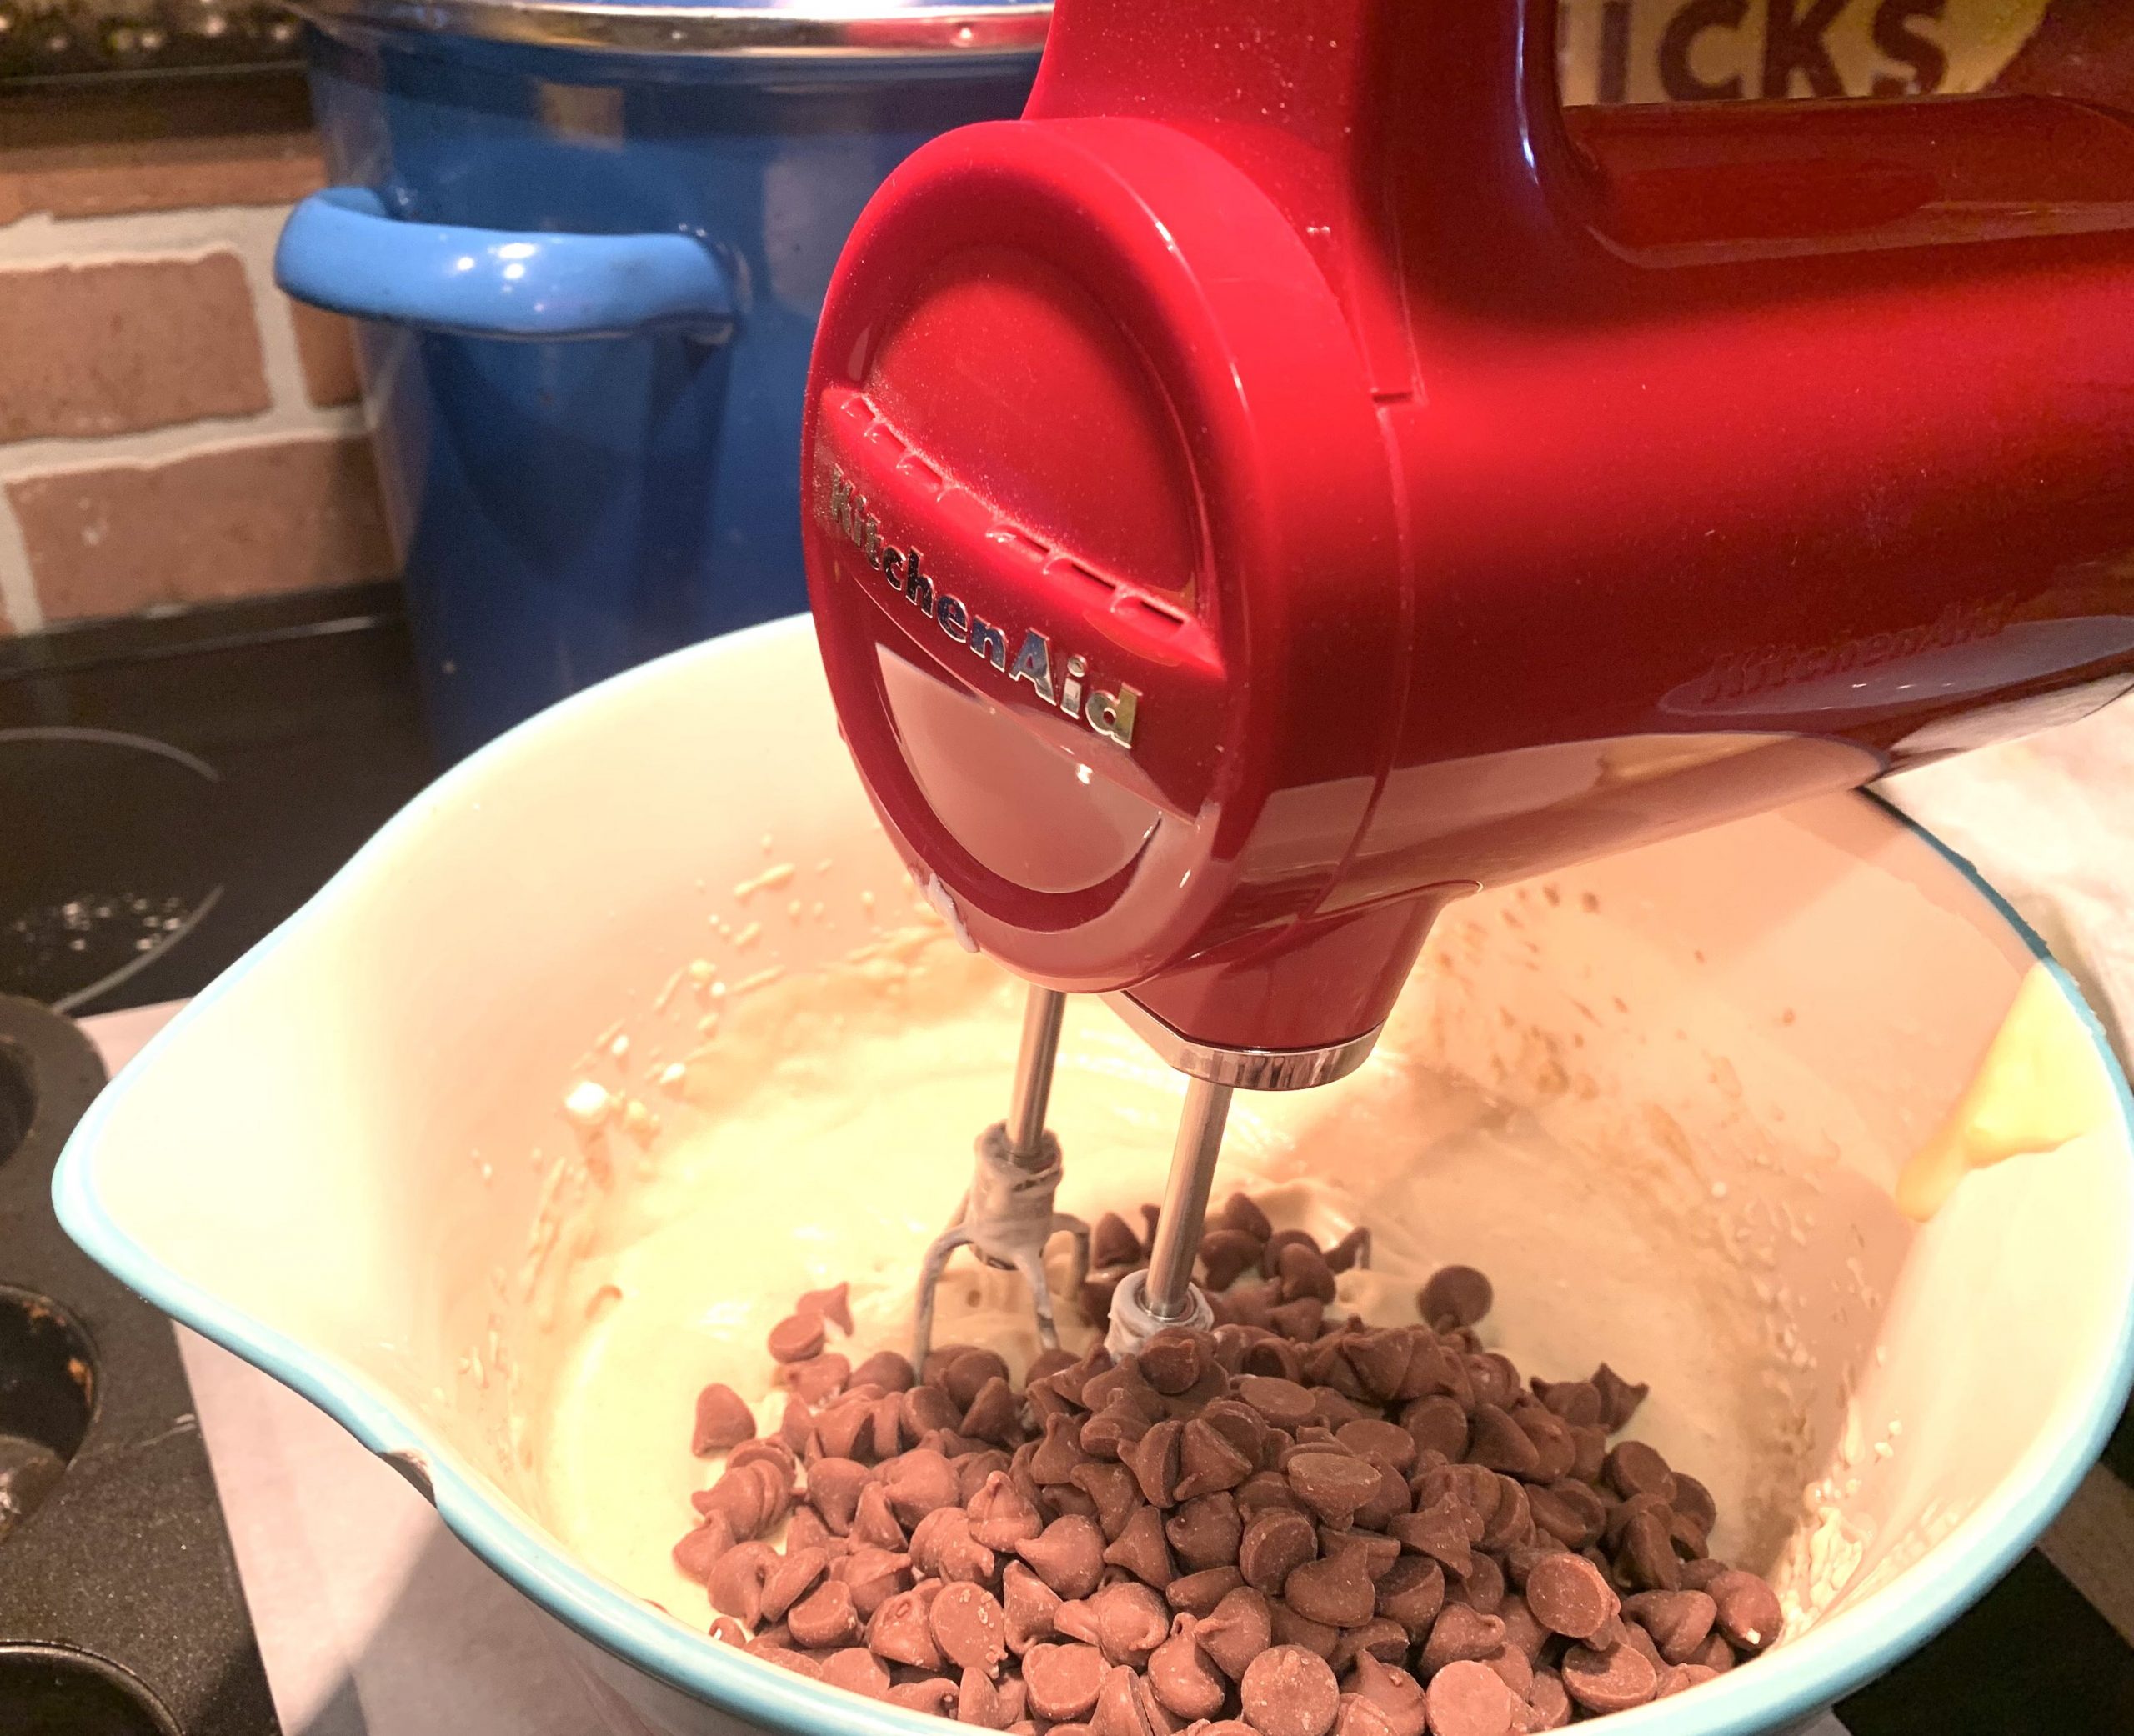 KitchenAid Cordless 7 Speed Hand Mixer helps to perfect your baked goods in  the kitchen » Gadget Flow